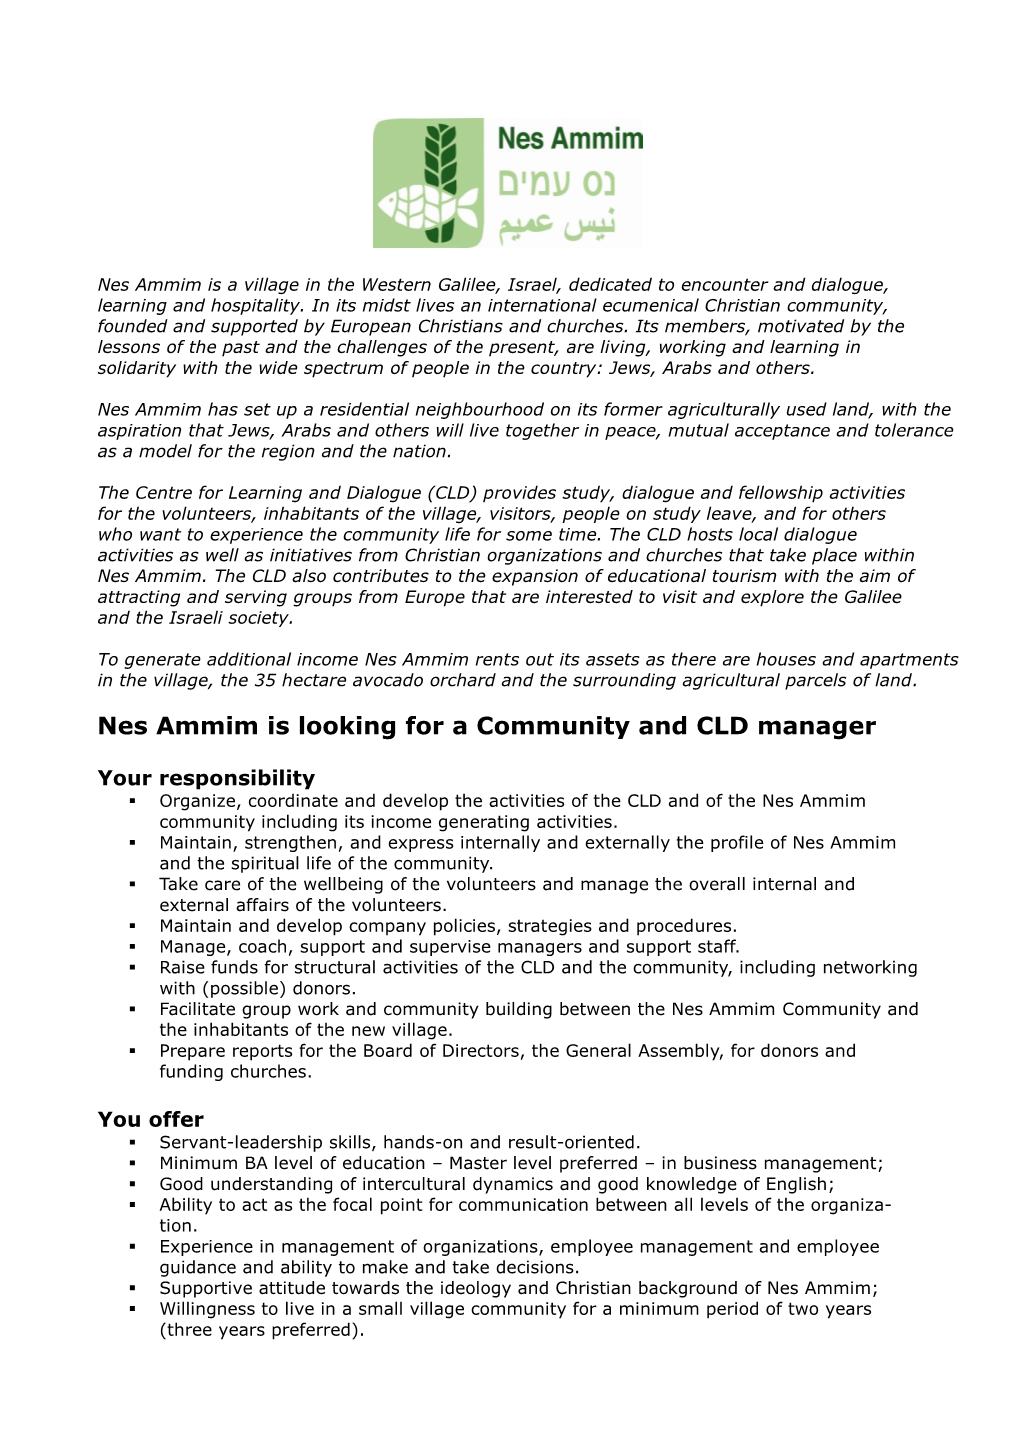 Nes Ammim Is Looking for a Community and CLD Manager